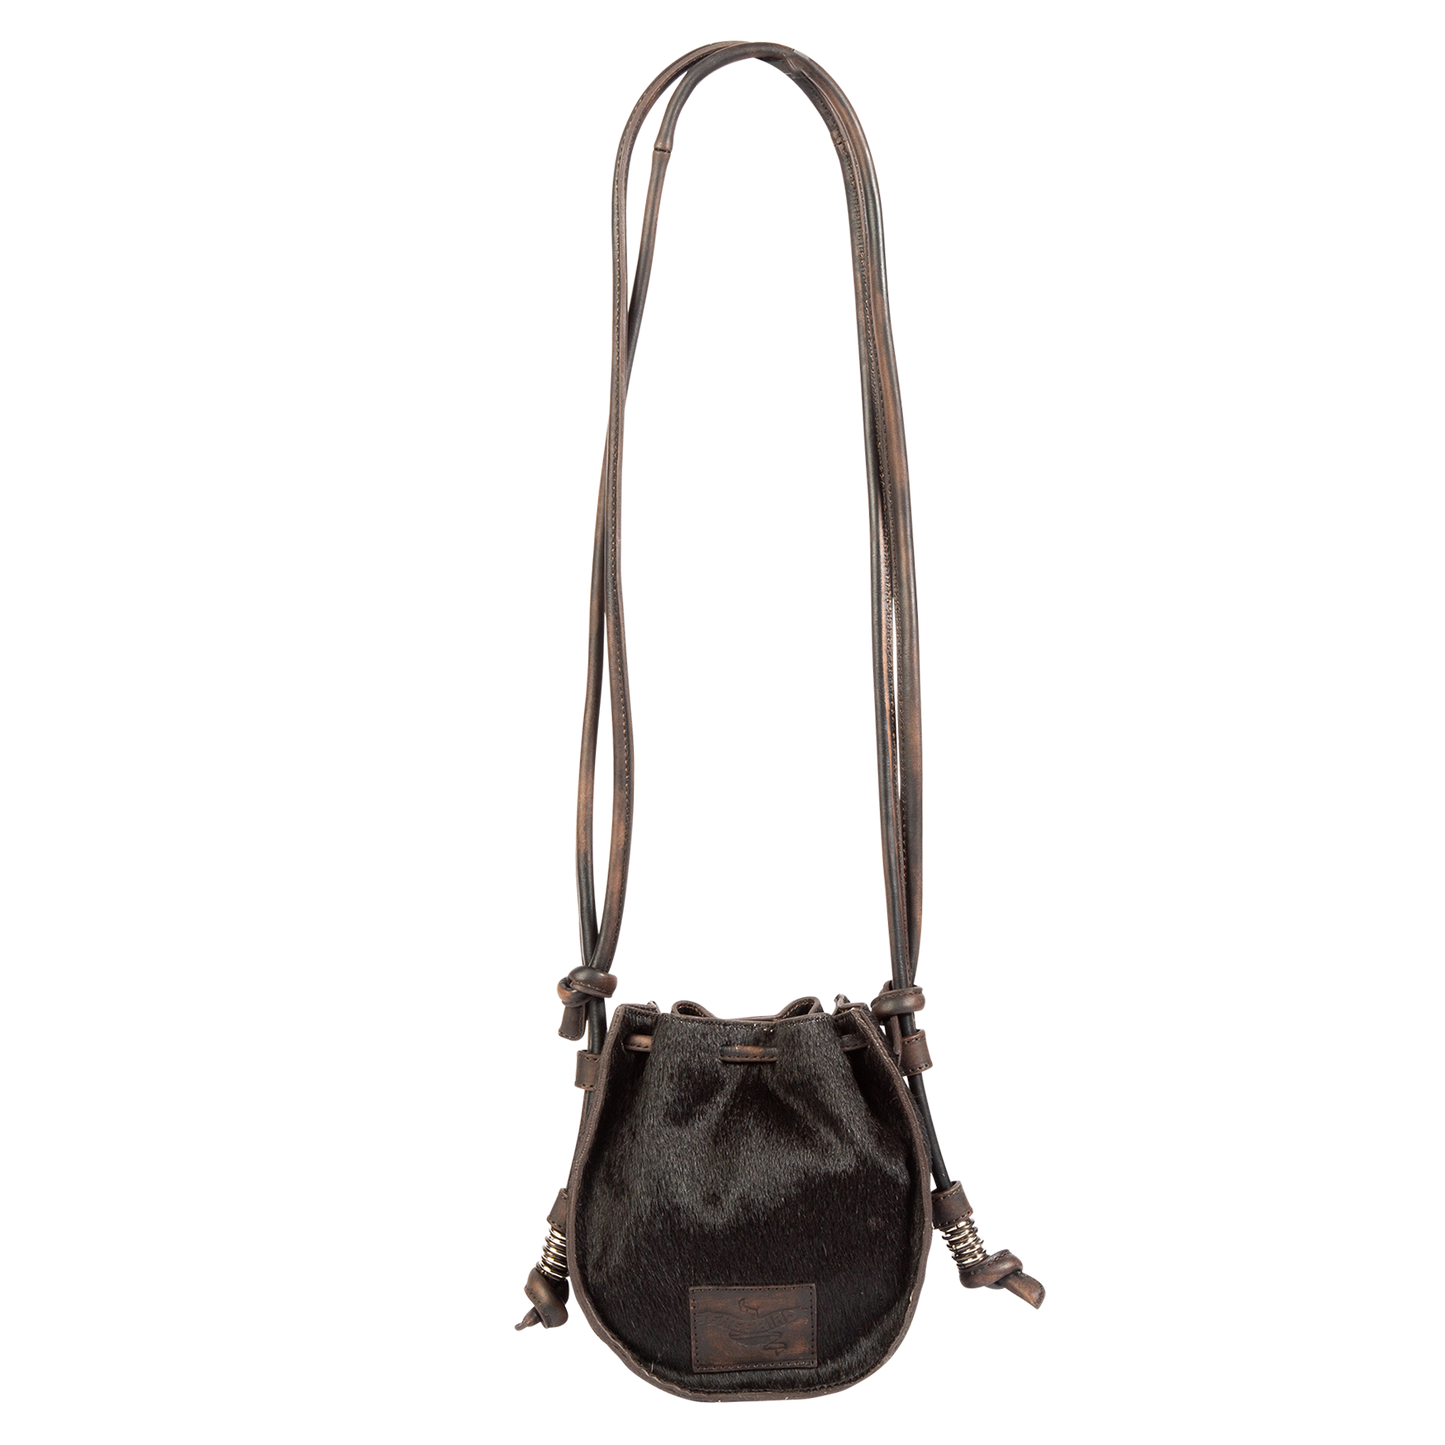 Back view showing leather shoulder straps and leather drawstring closure on FREEBIRD Stella black bag